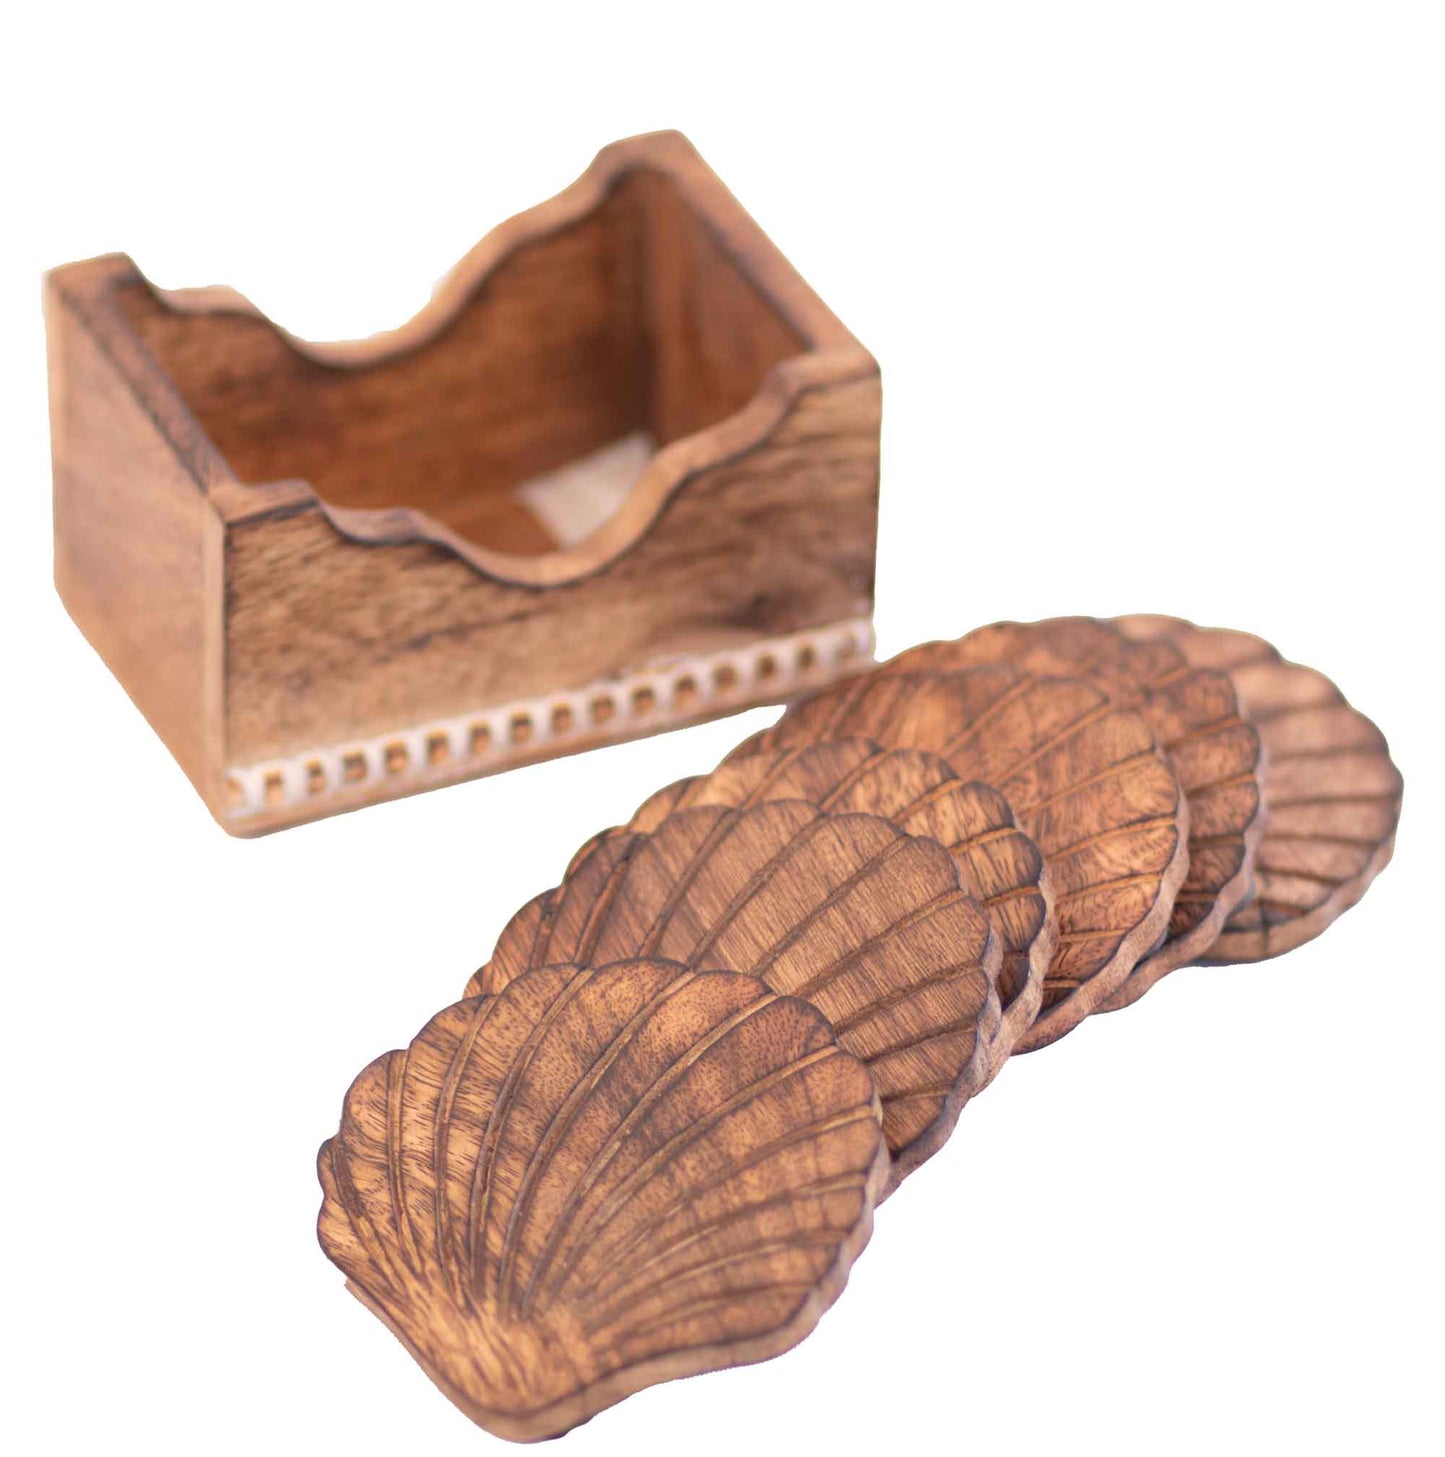 Kezevel Wooden Coasters Mango Wood - Handcrafted Seashell Design - Set of 6 with Holder for Serving - Coaster Plate